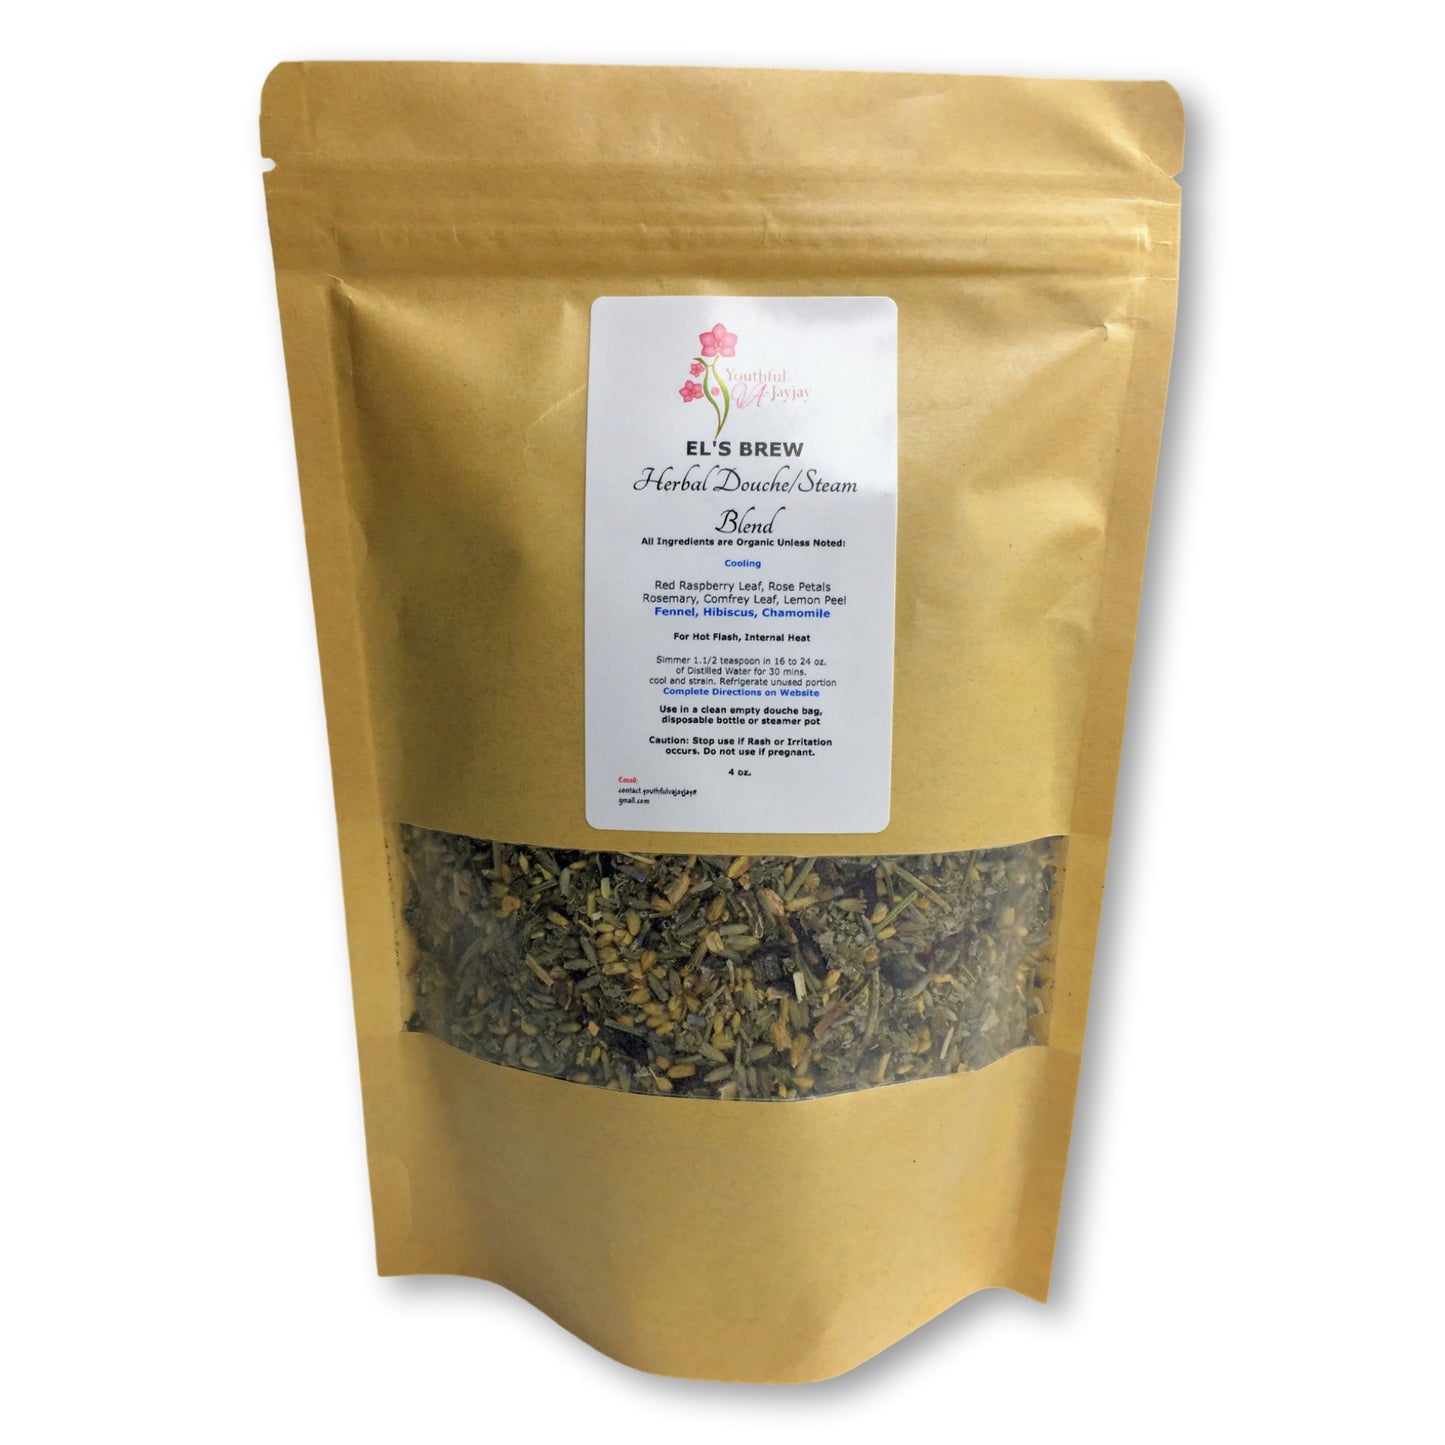 EL'S BREW- Organic Herbal Steam/Douche Blend, Handcrafted COOLING USE, 4oz.